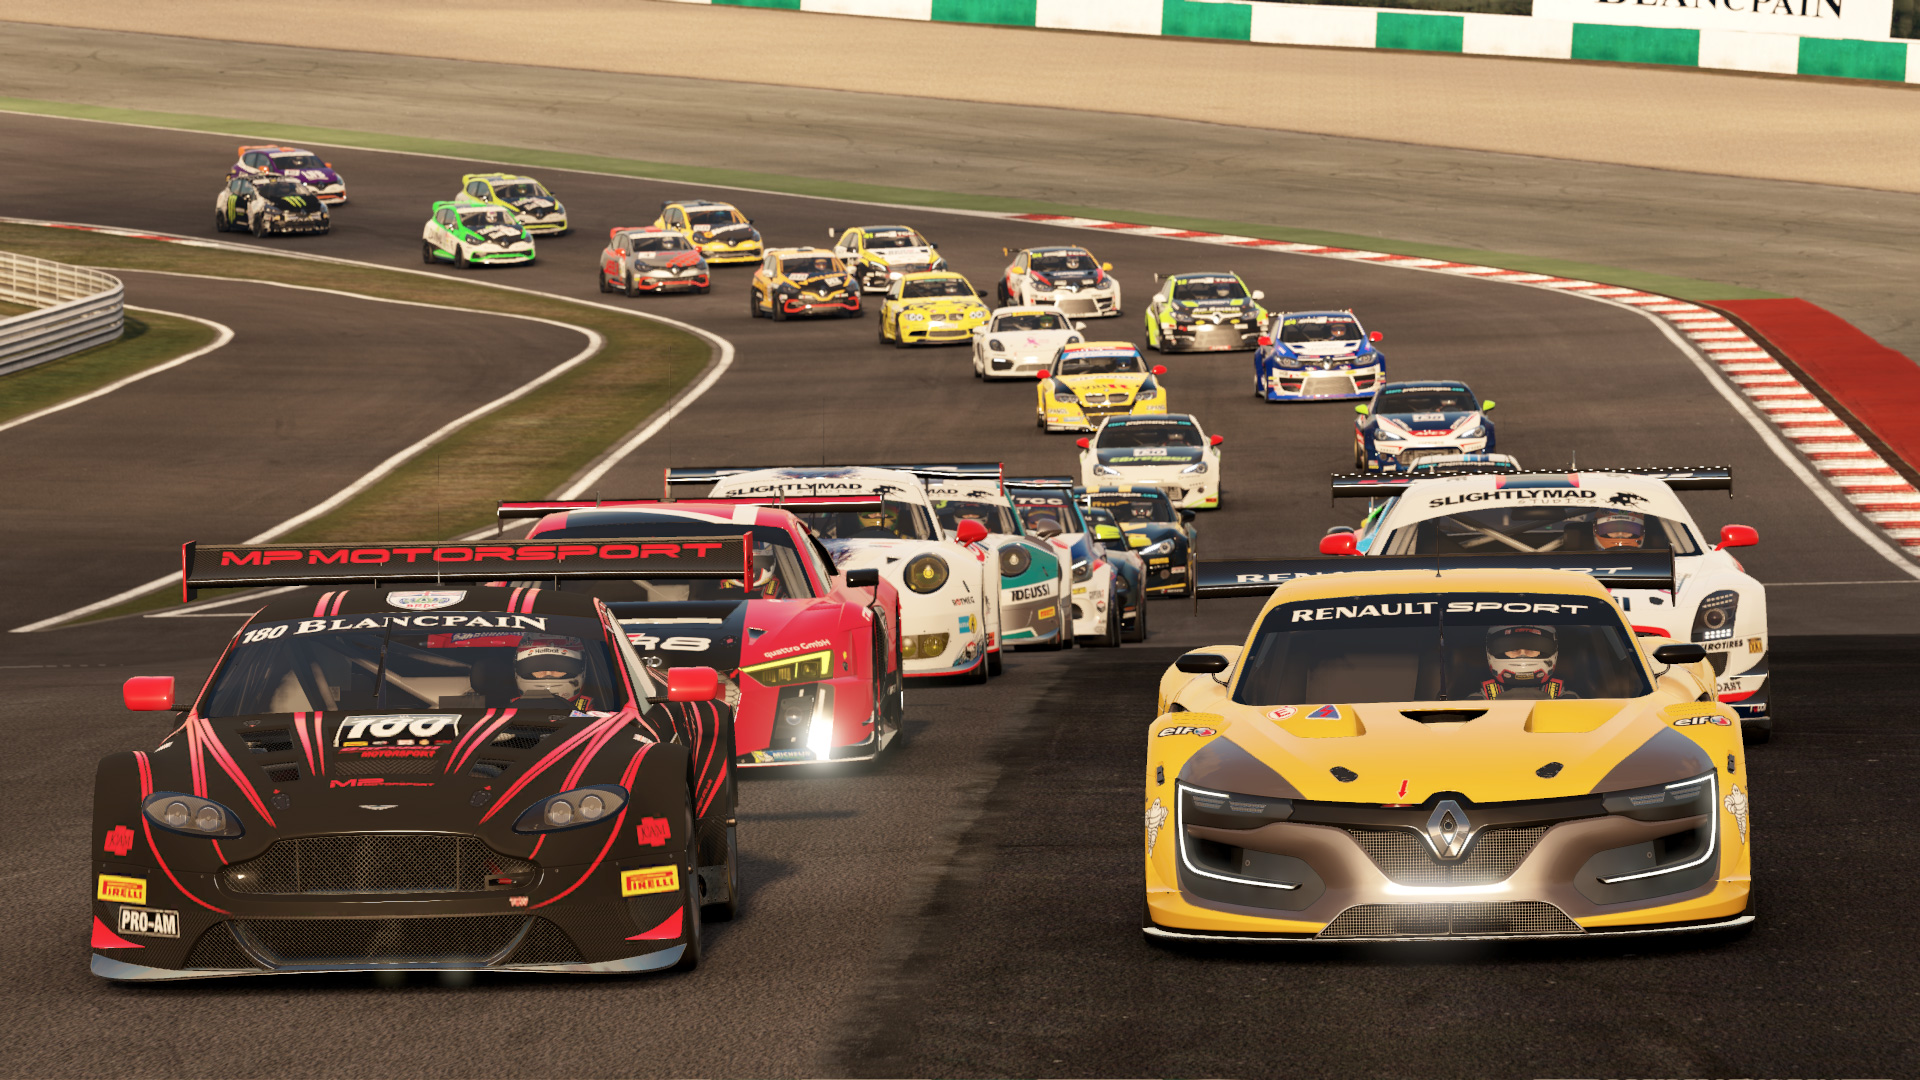 EA’s Project Cars is no more as staff is shuffled to other projects, Digital Rumble, digitalrumble.com